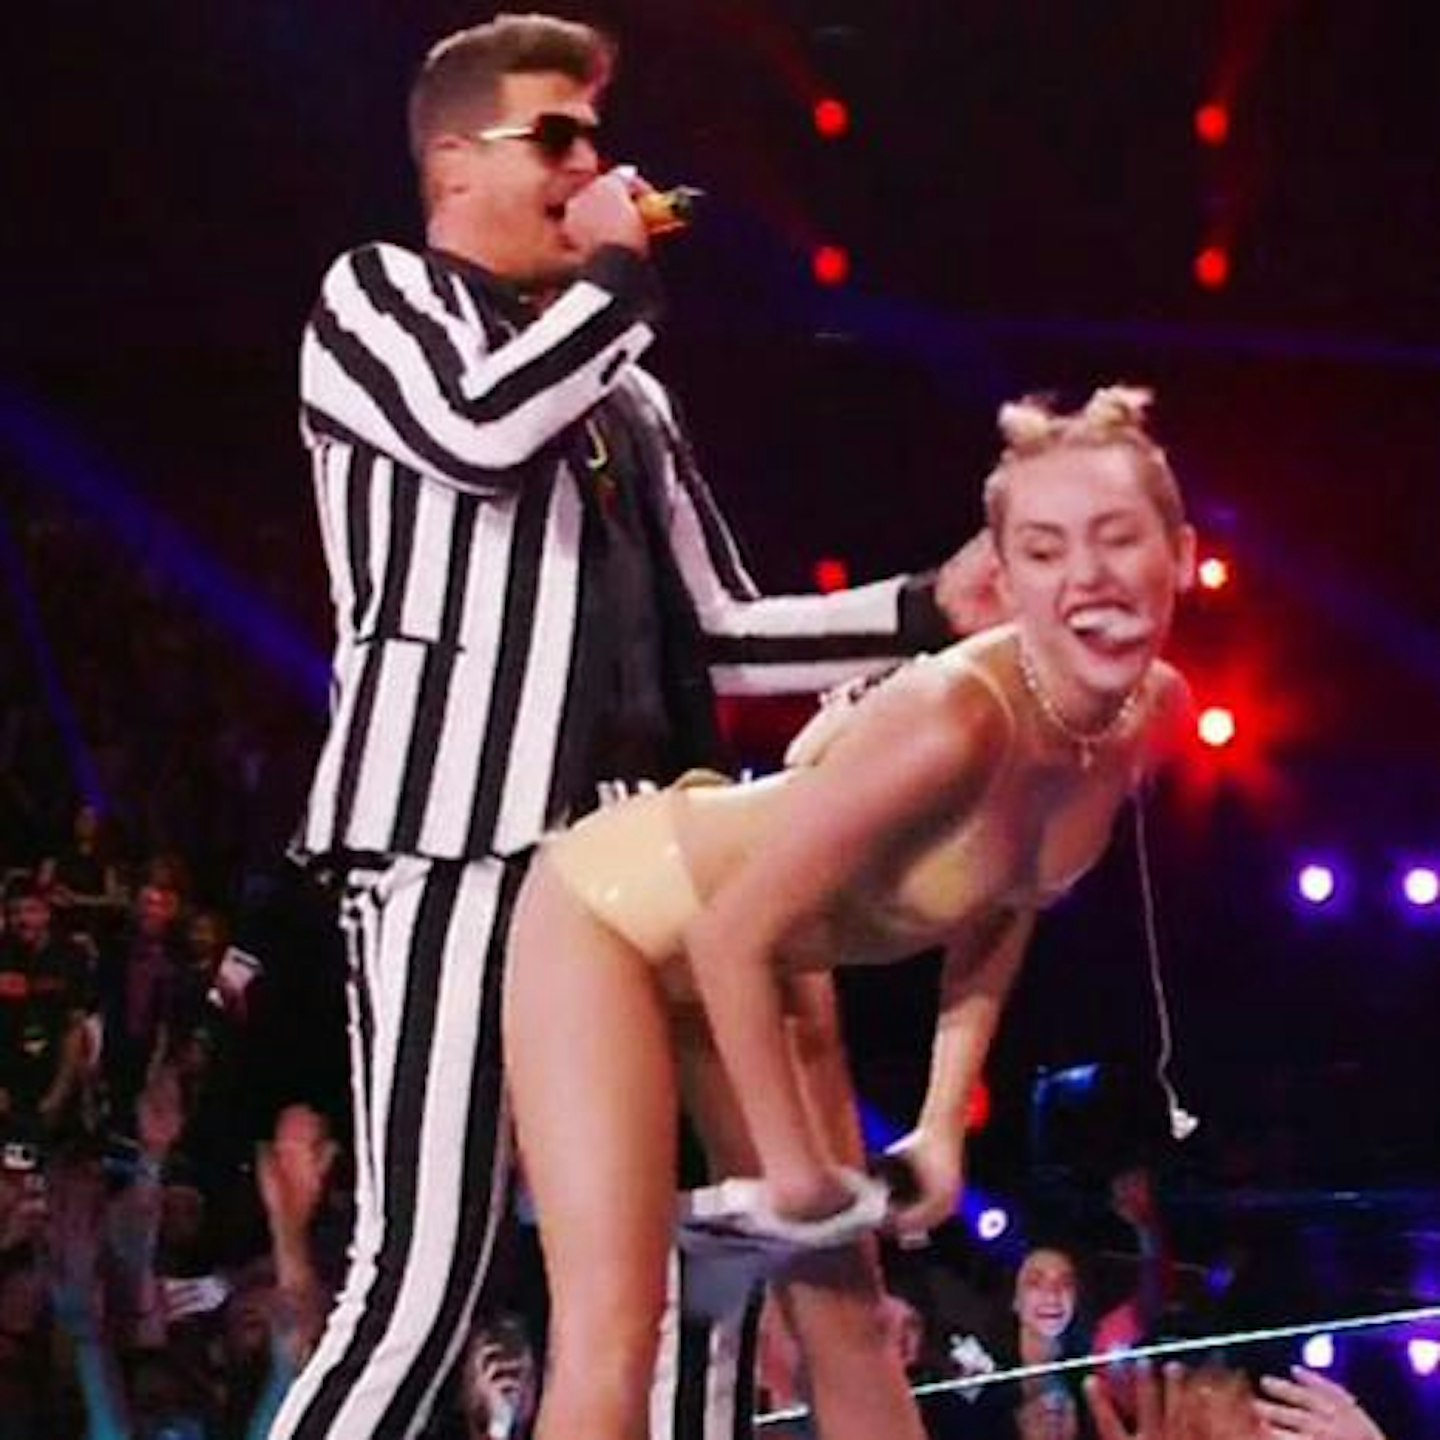 Miley Cyrus' VMAs performance has been slated by Harry Styles